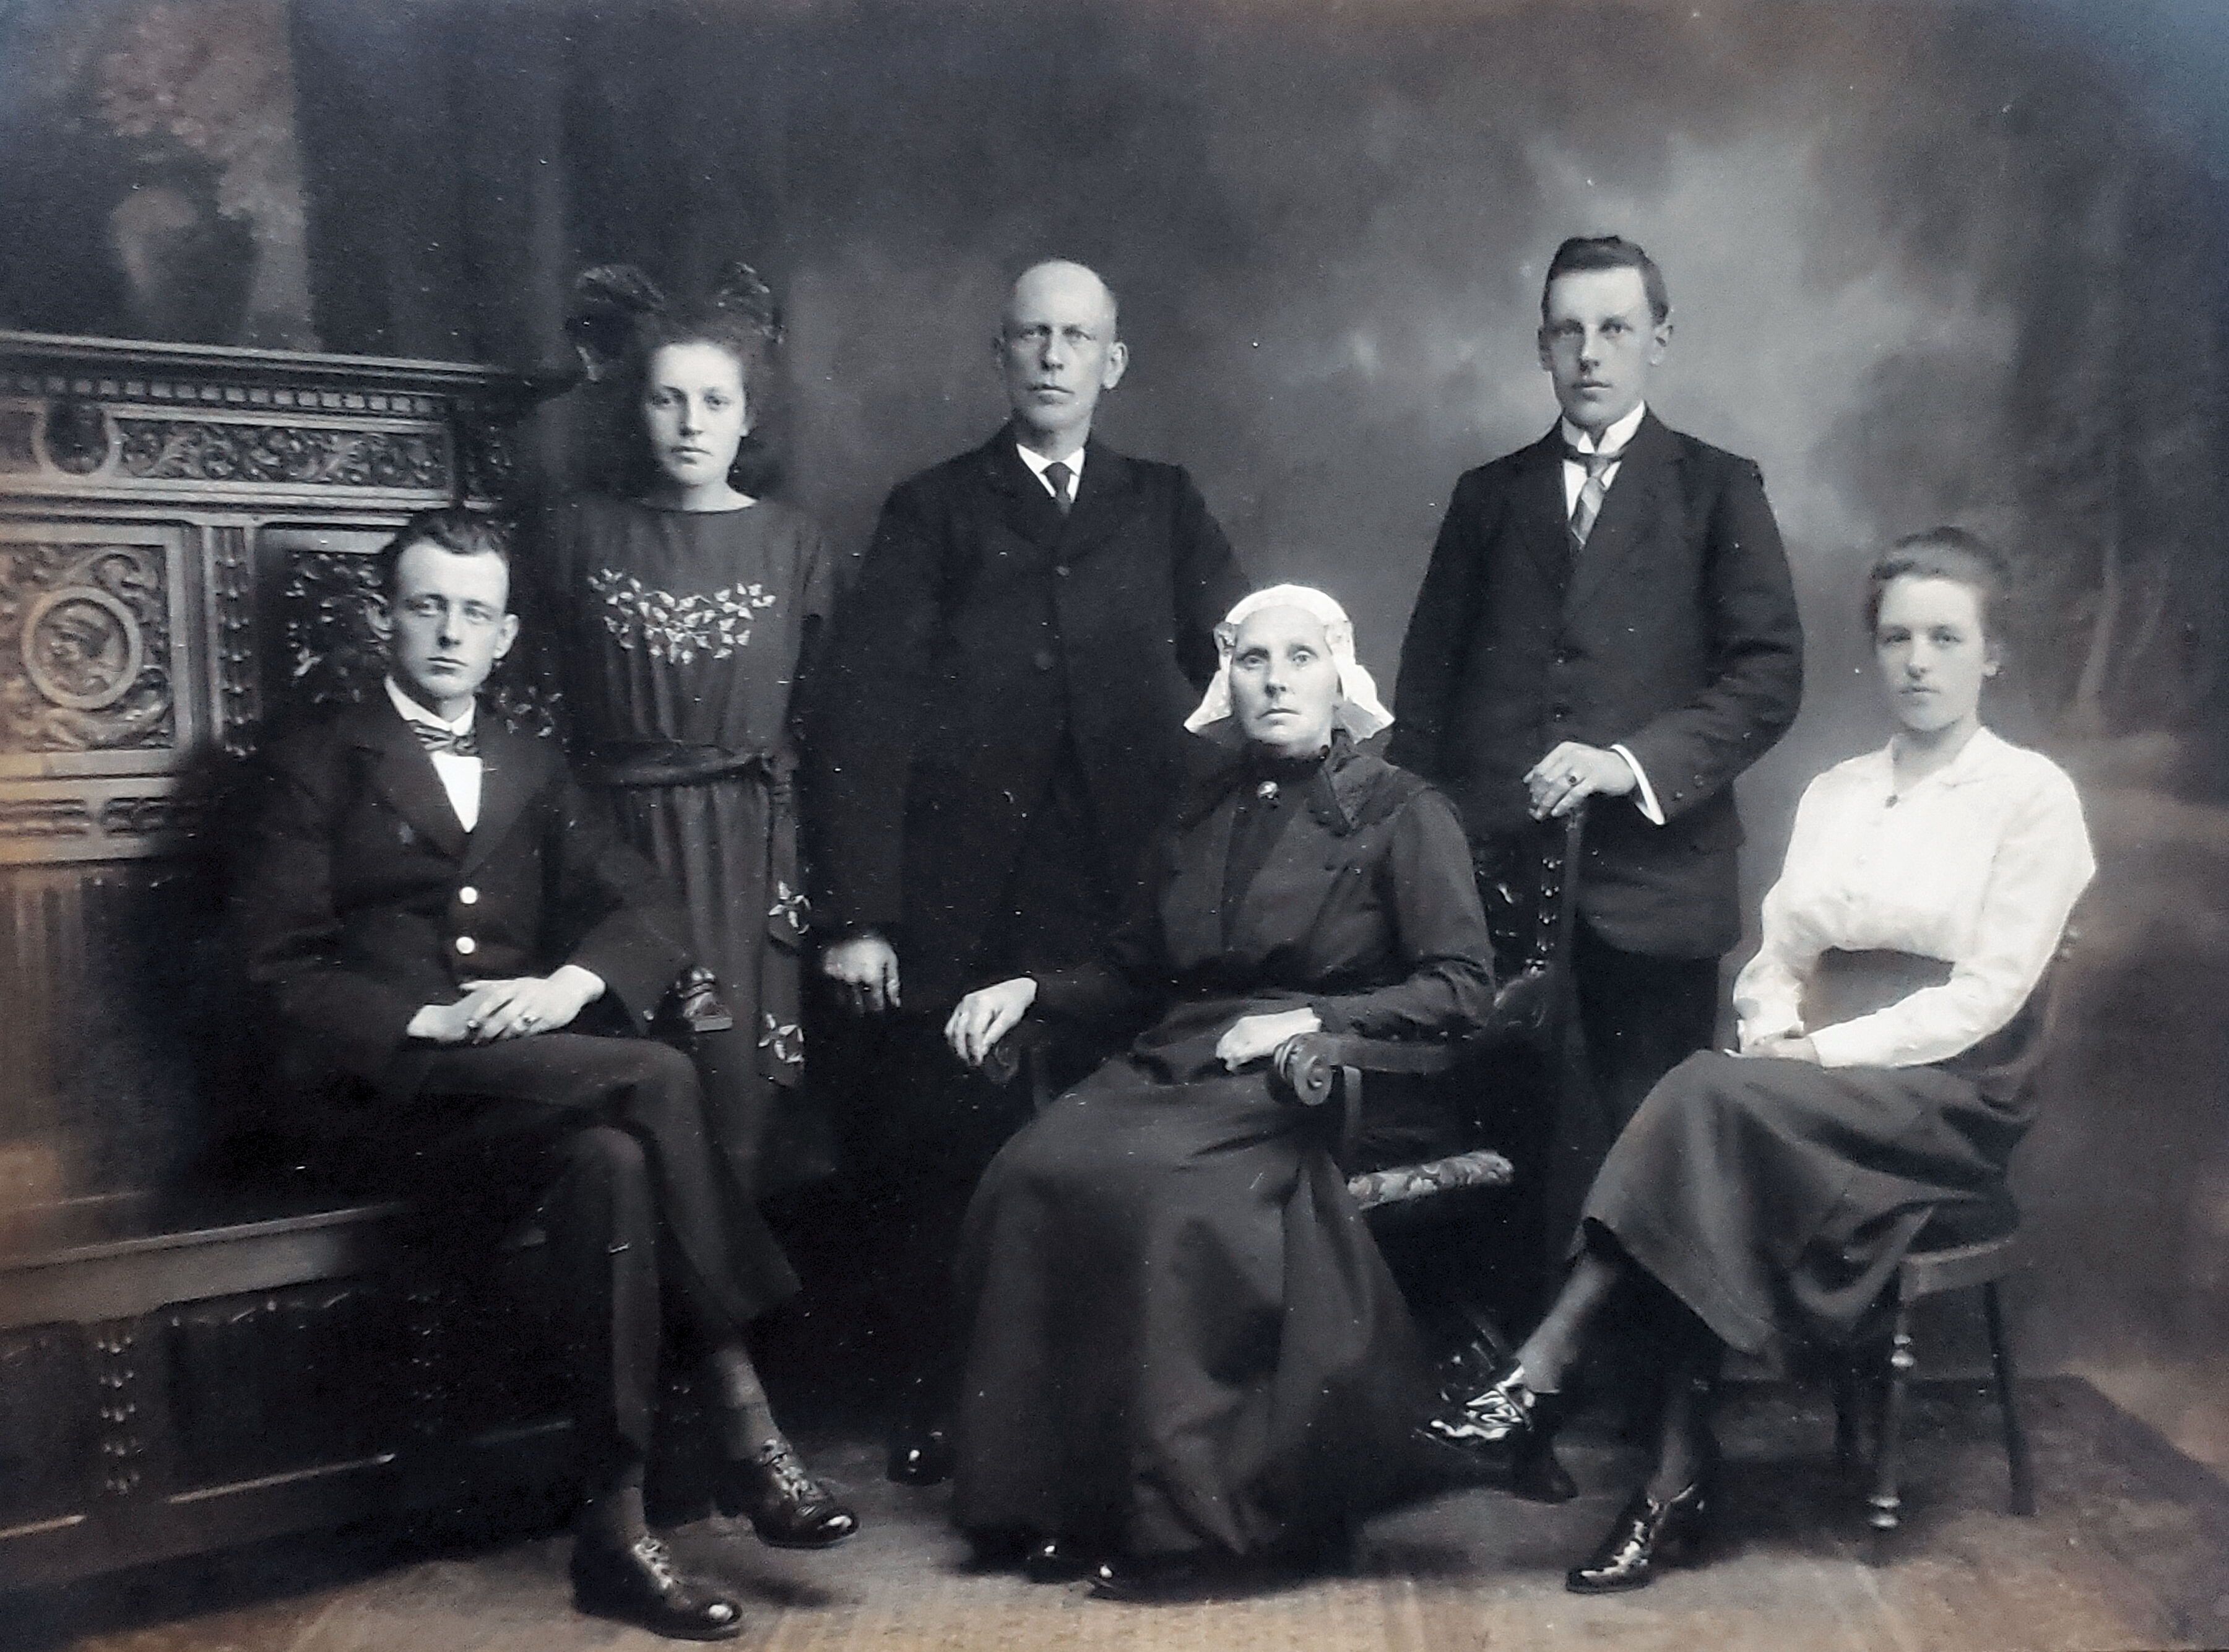 This is my Opa de Vos's Family early 1900's